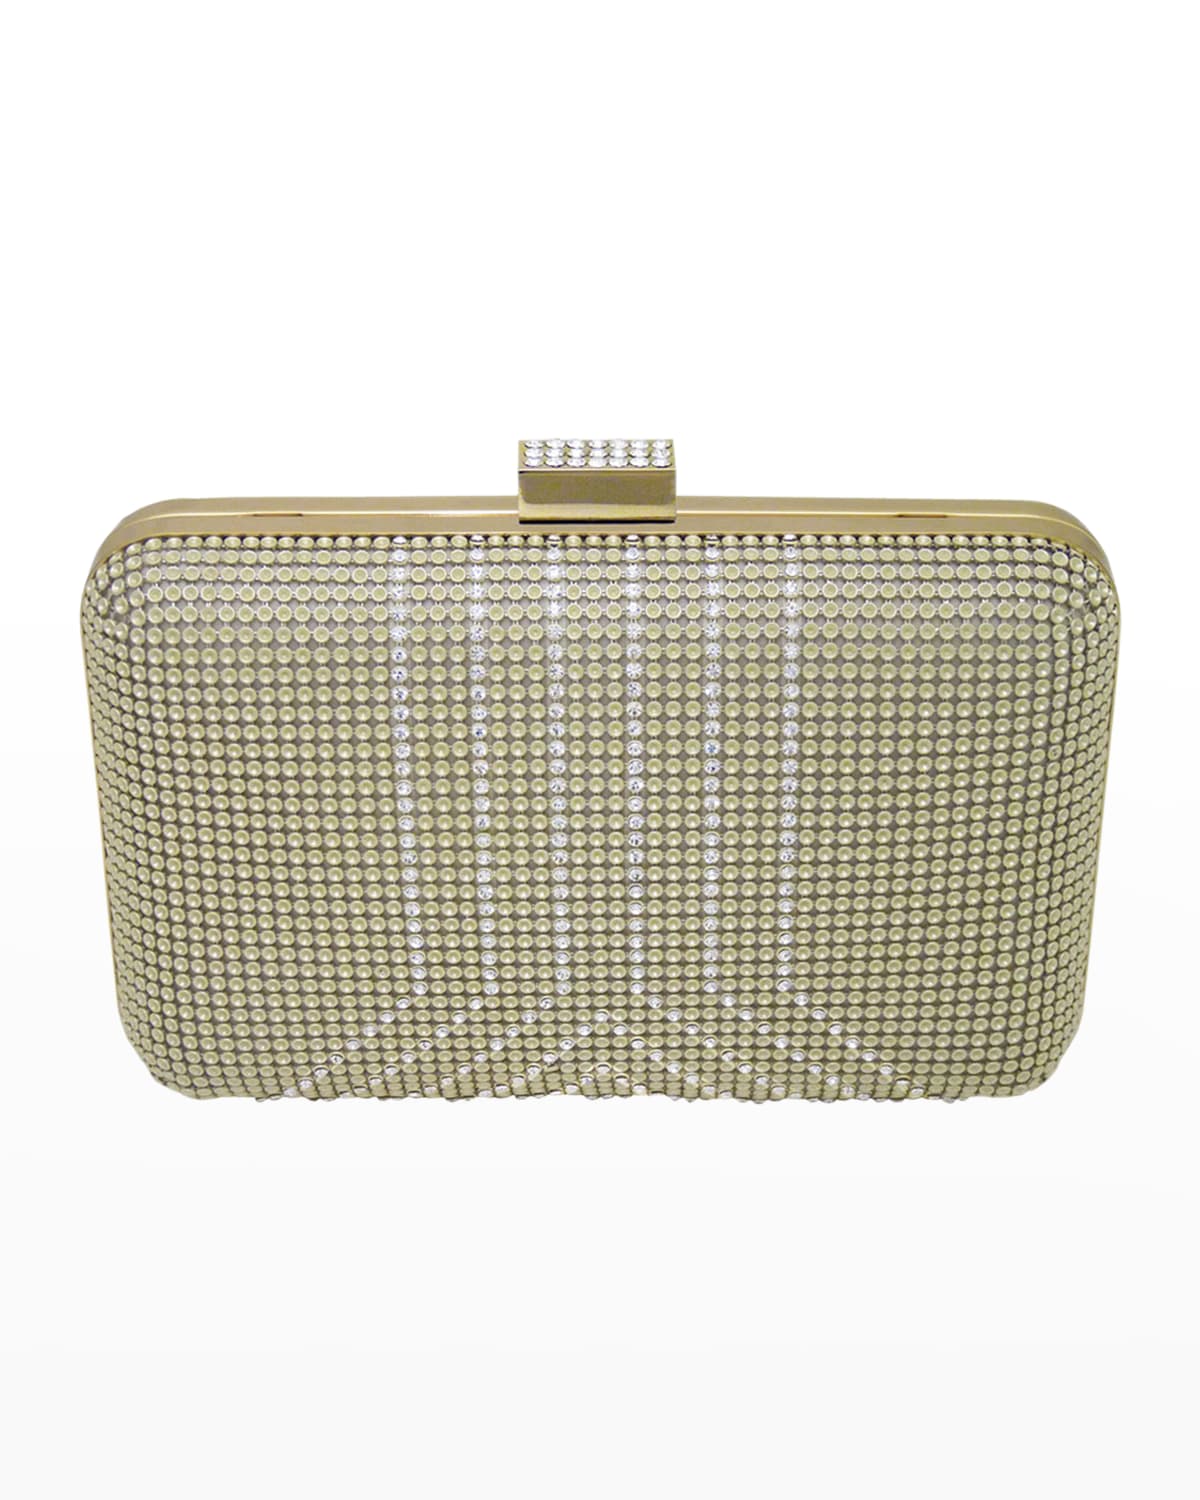 Whiting & Davis Dimple Embellished Mesh Clutch Bag | Neiman Marcus